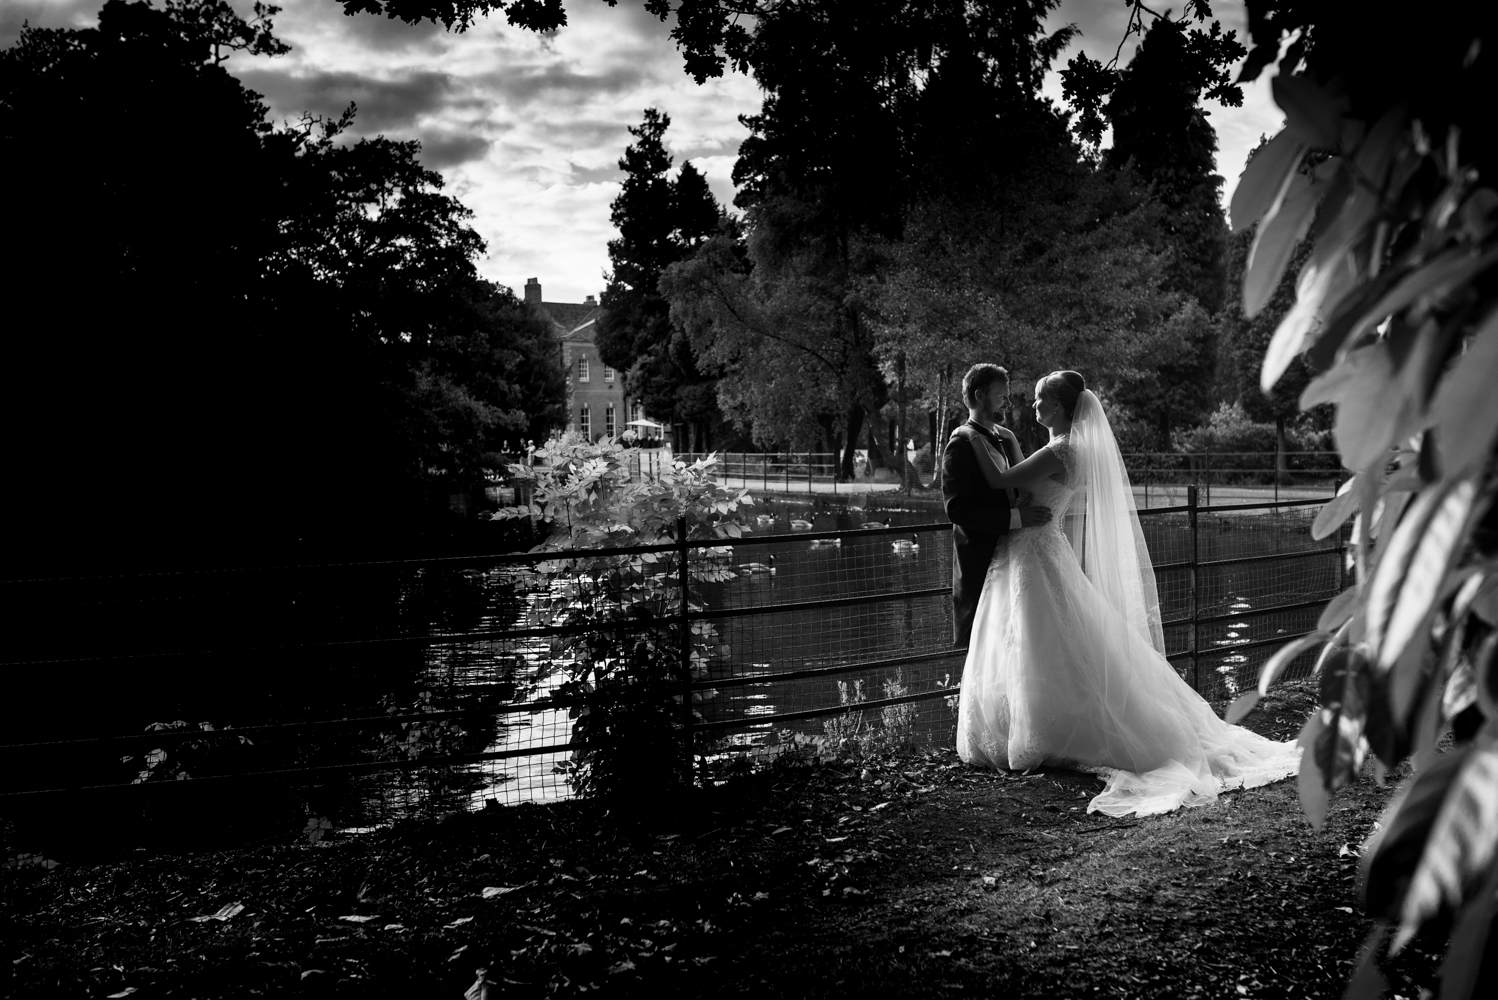 Black and white portrait of the bride and groom with the lake and hall in the background the swans even came over to say hi